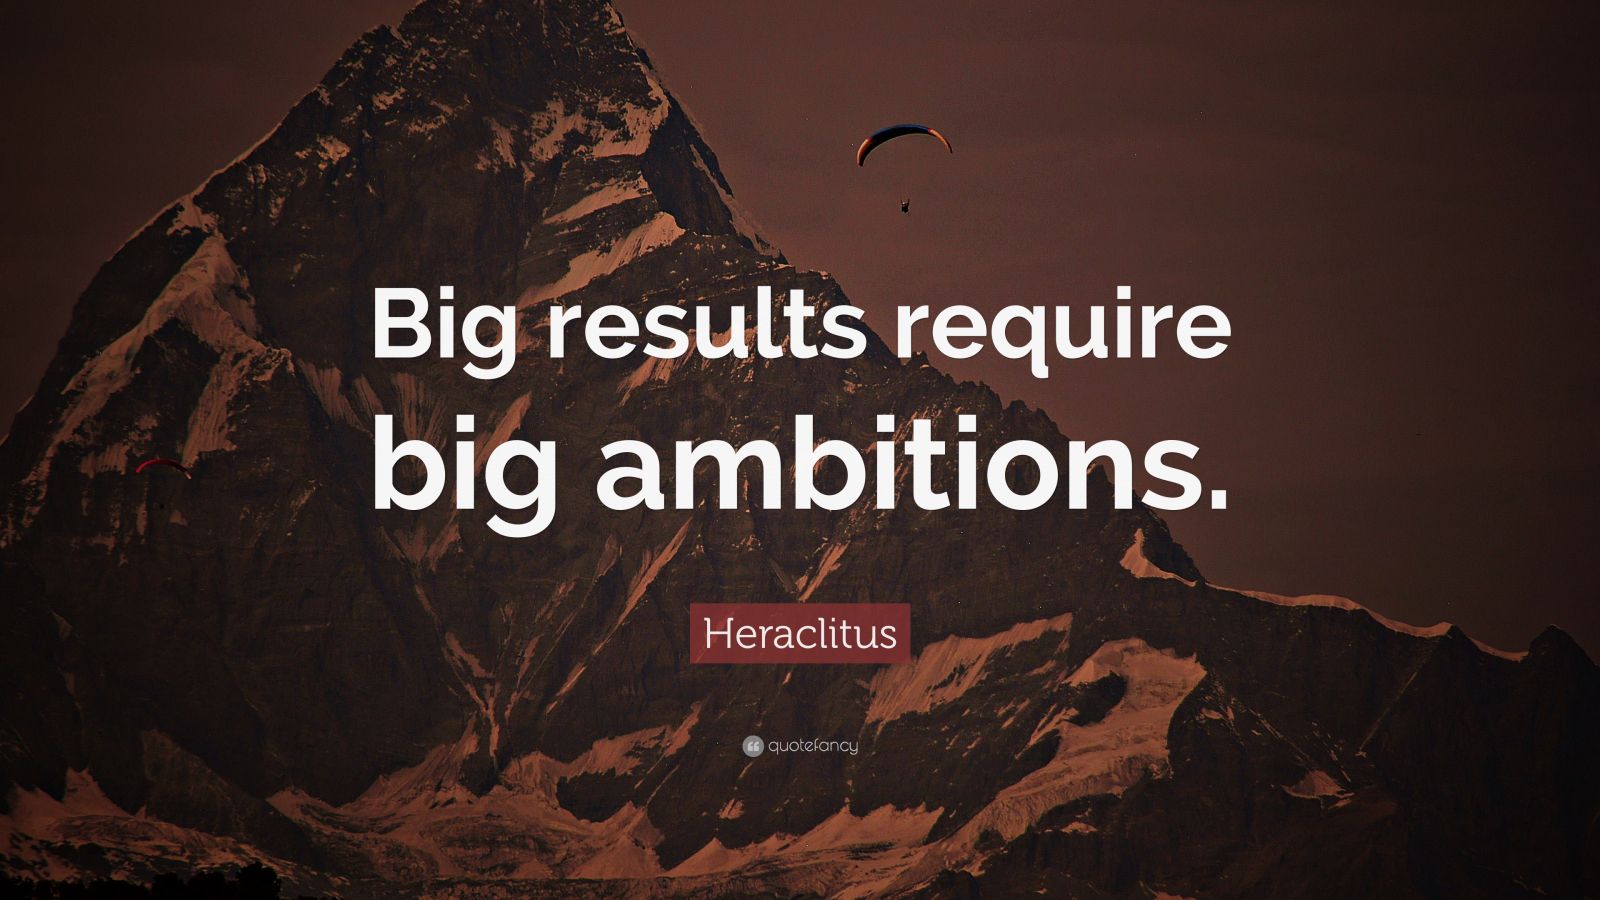 “Big results require big ambitions.”